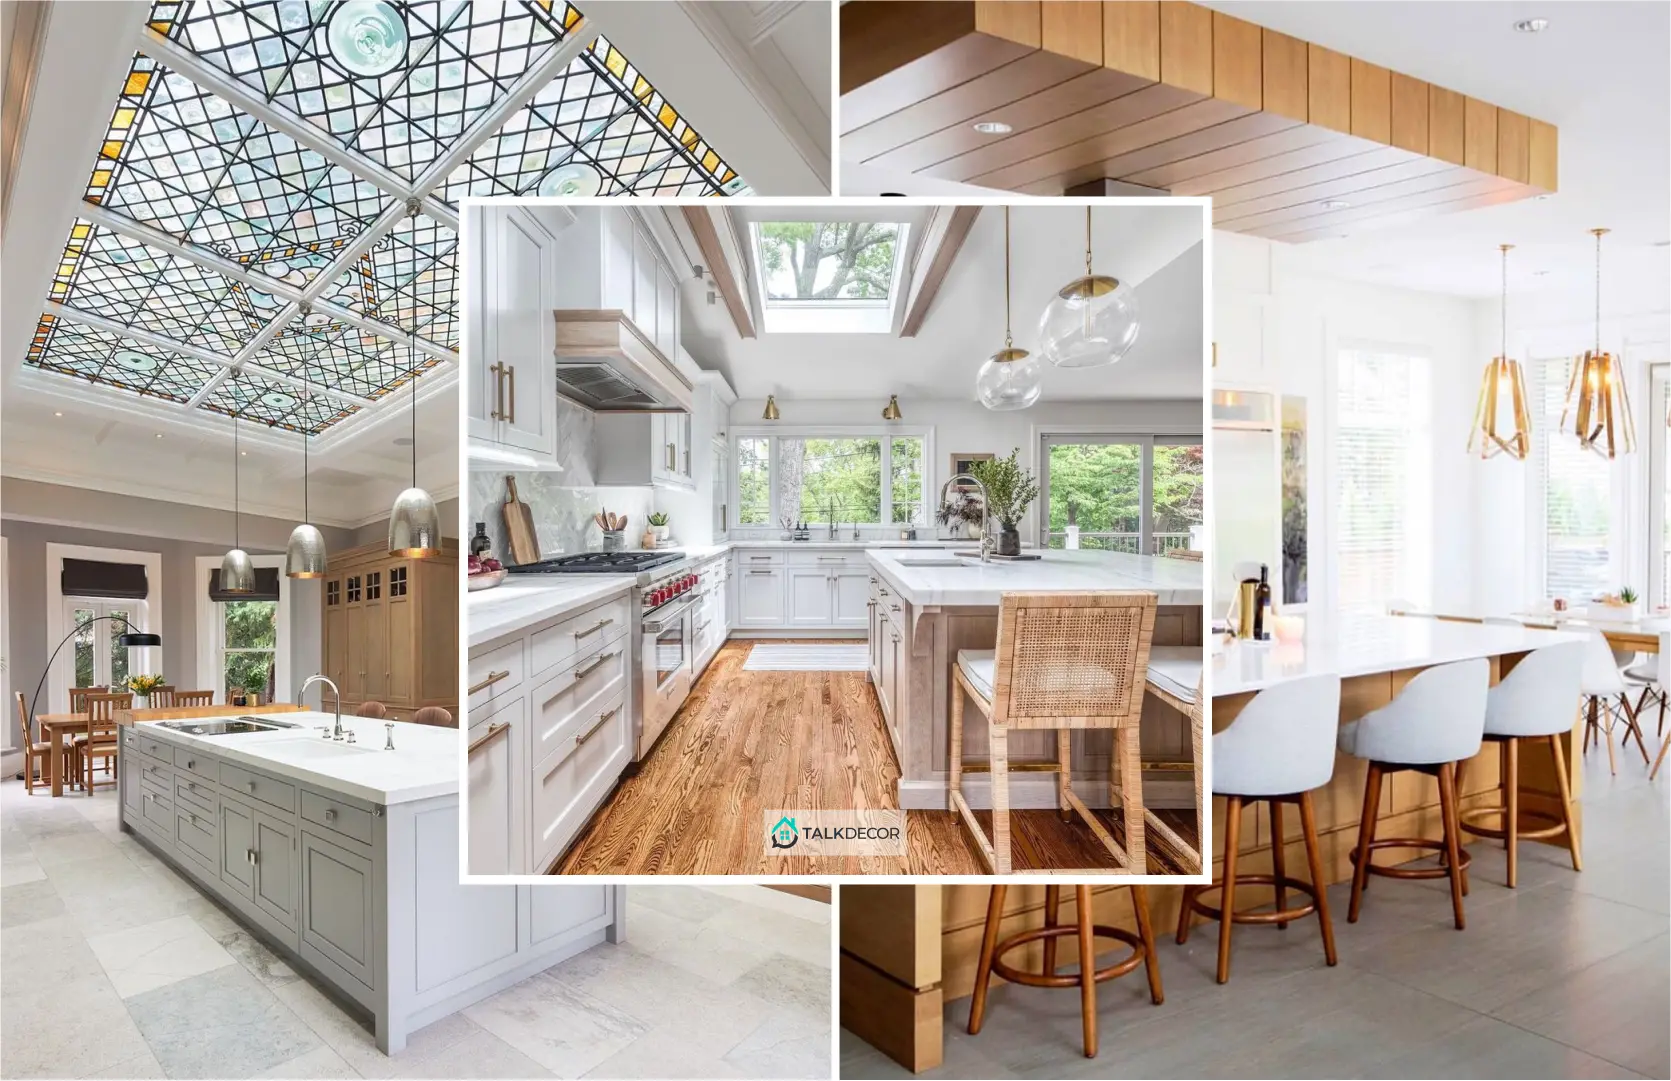 How to Decorate Your Kitchen Island Ceiling